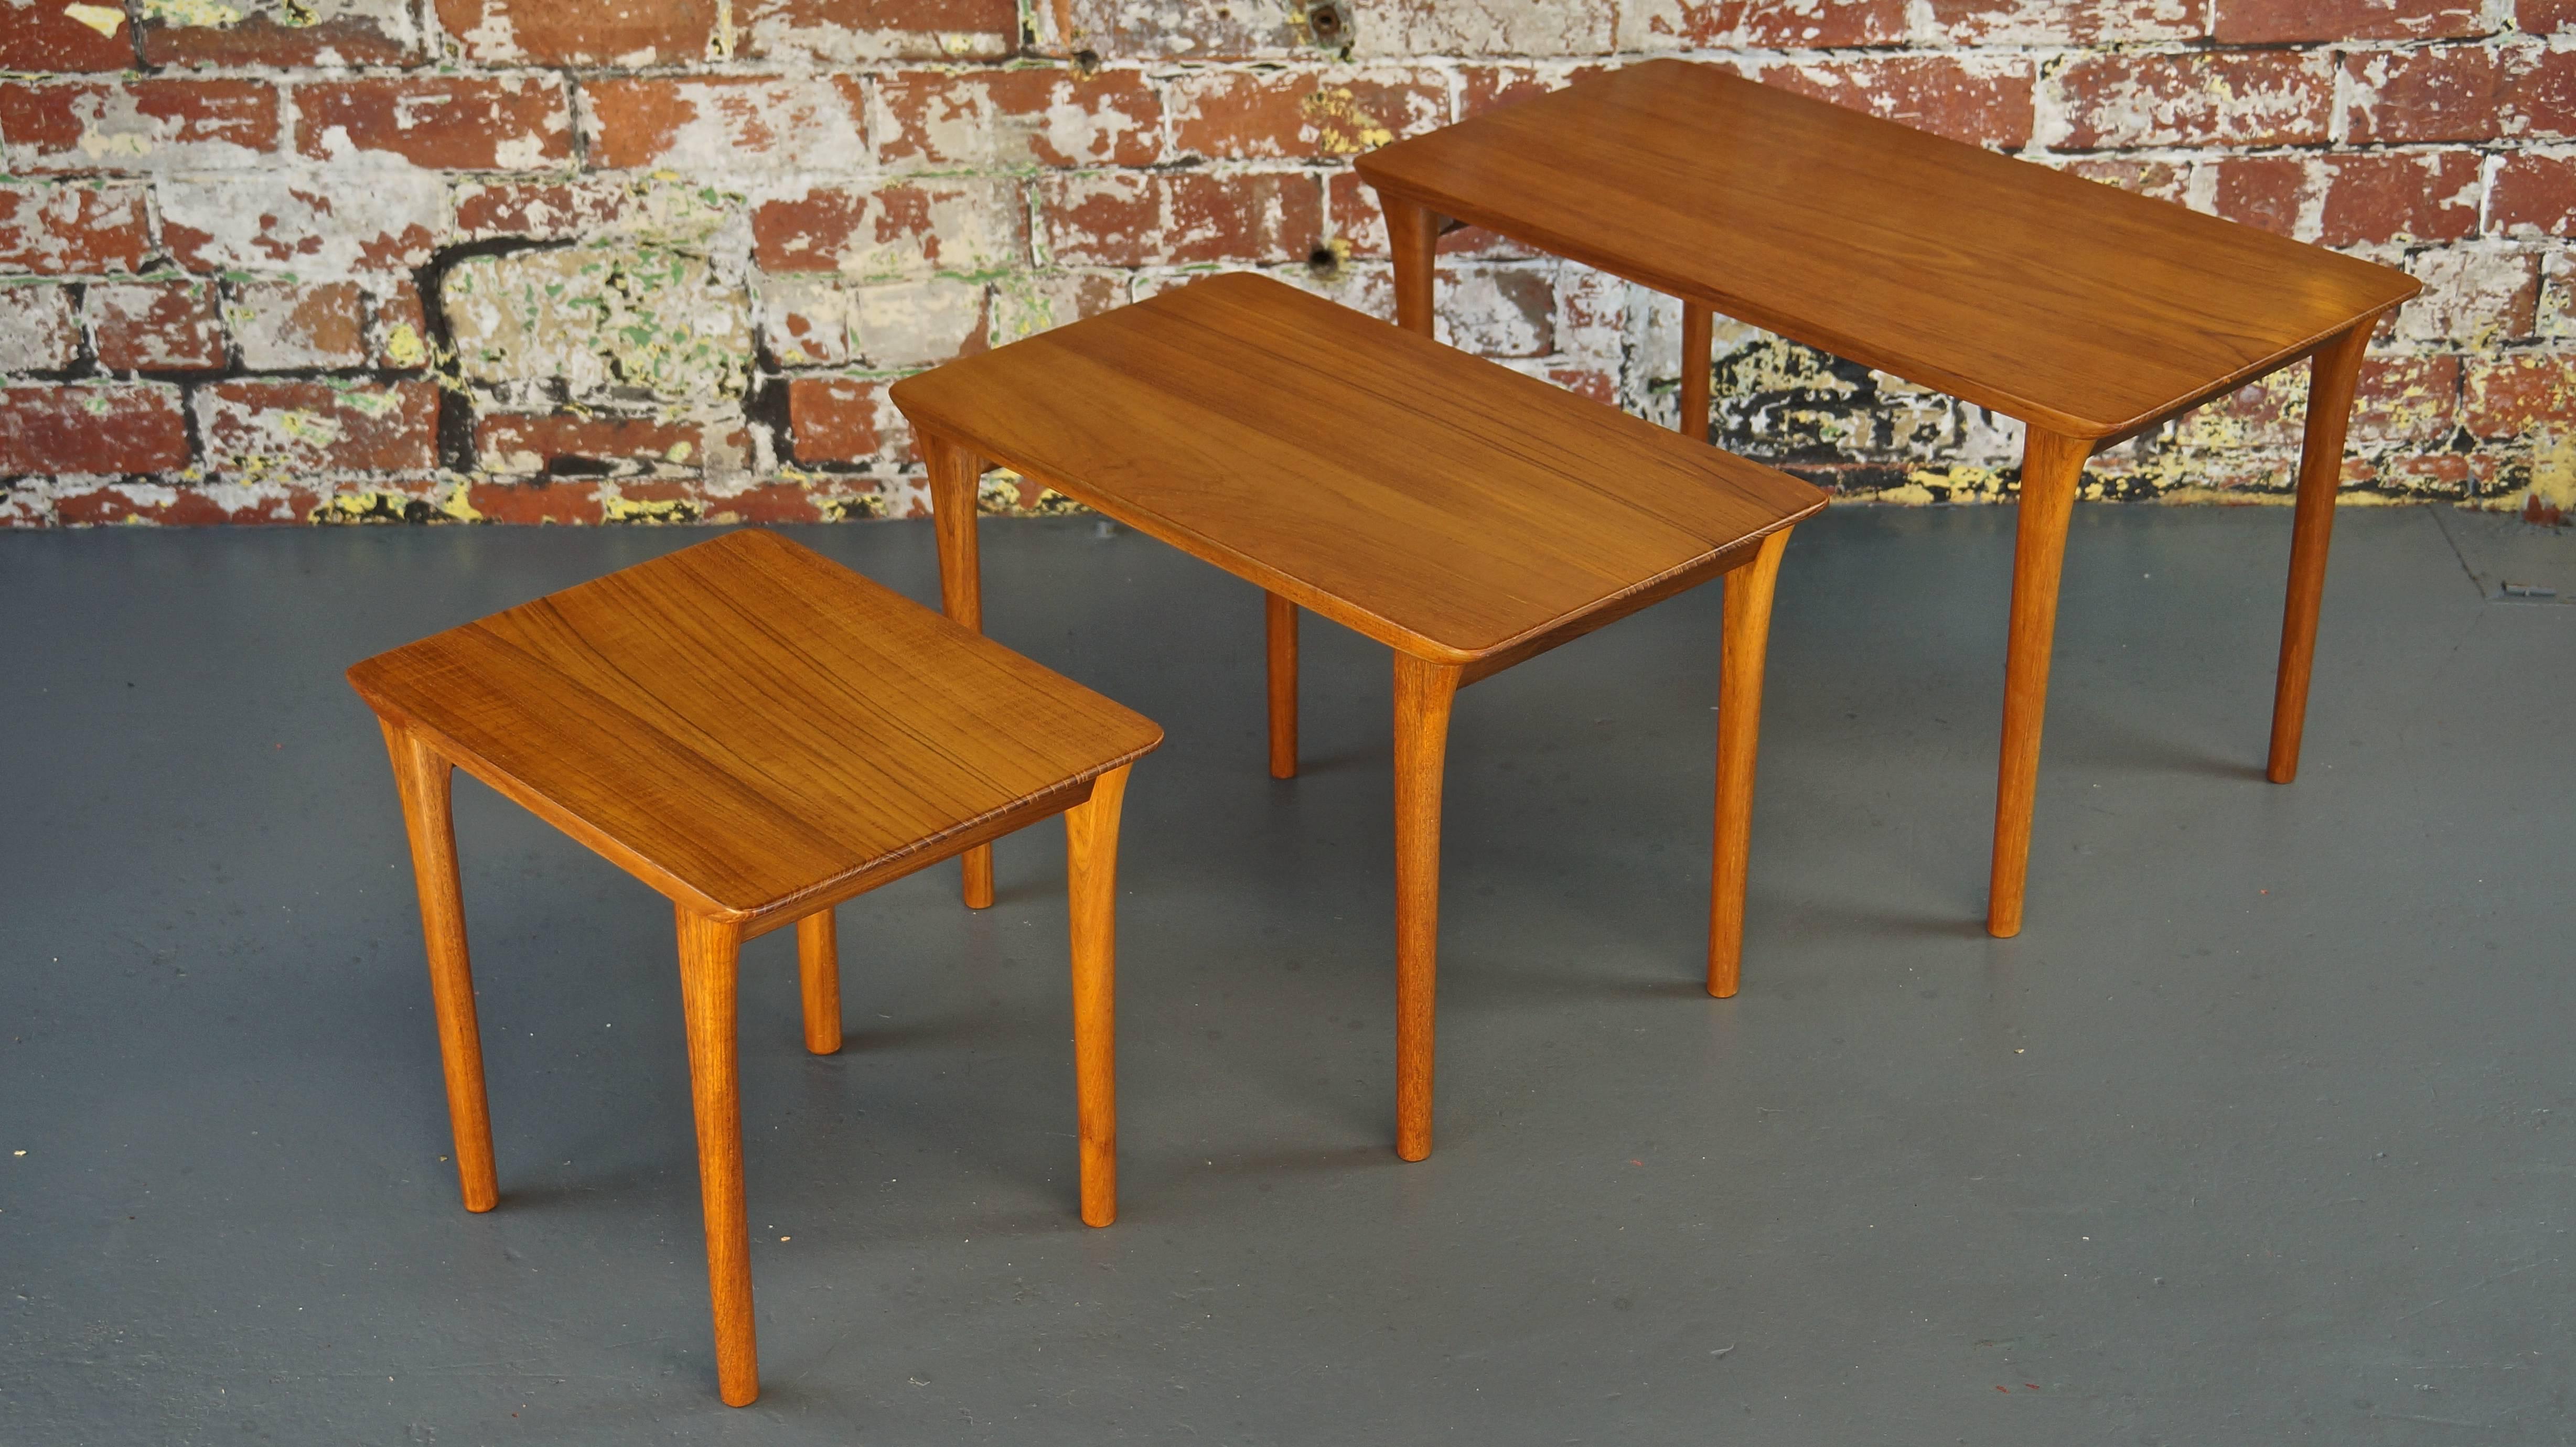 Rare Mid-Century Vintage solid teak danish nest of three tables or end tables.

An elegant teak nest of tables of very high quality being entirely constructed from solid teak which is incredibly rare! 

The organic shape of the solid teak legs